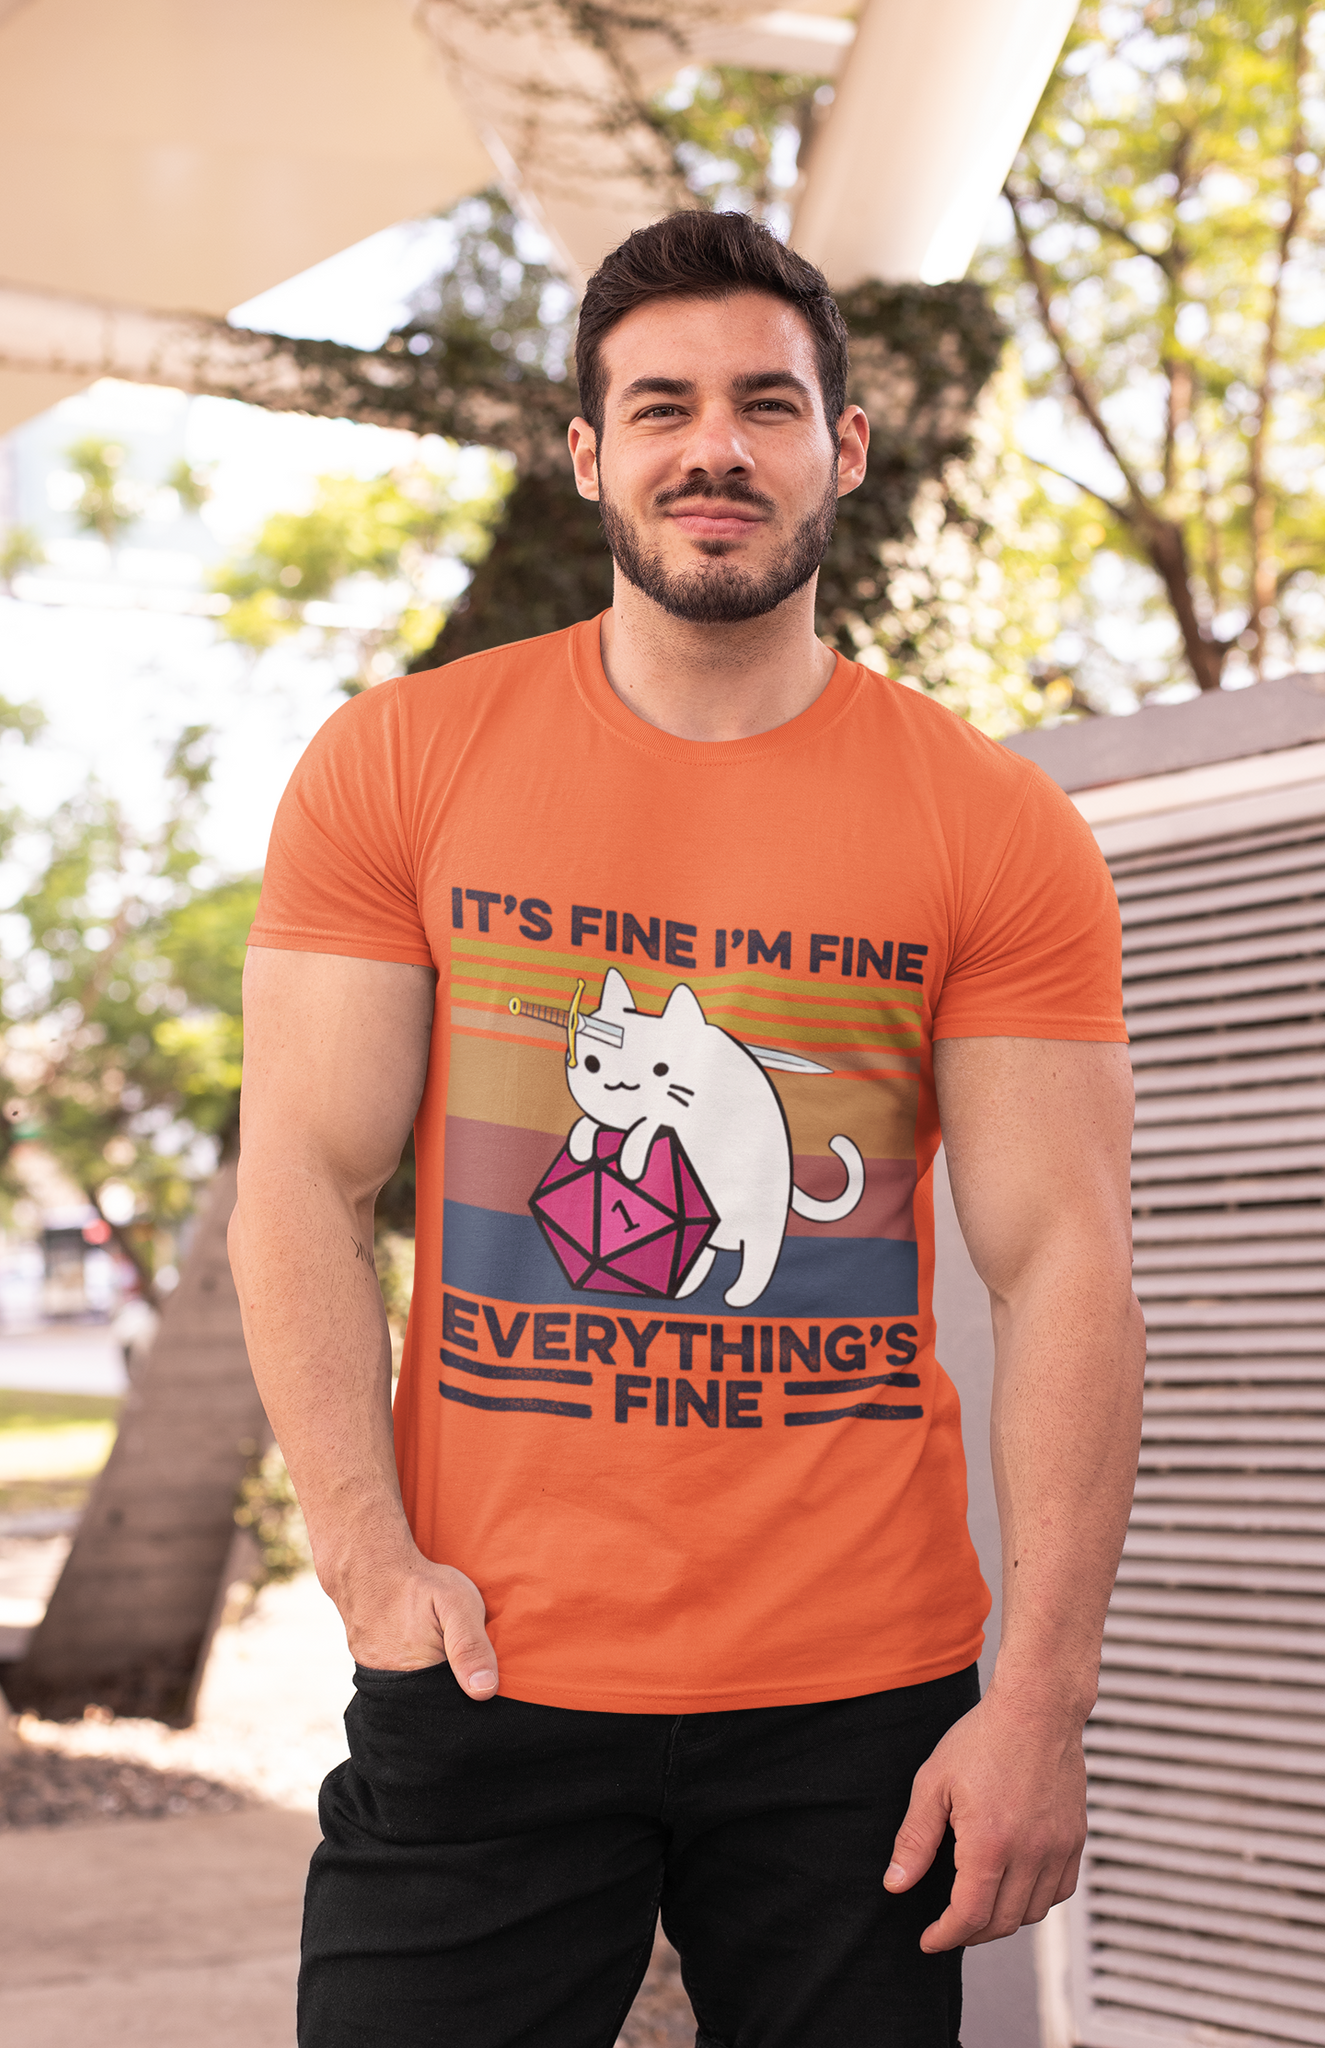 Dungeon And Dragon Vinatge T Shirt, RPG Dice Games Tshirt, Cat Its Fine Im Fine Everythings Fine T Shirt